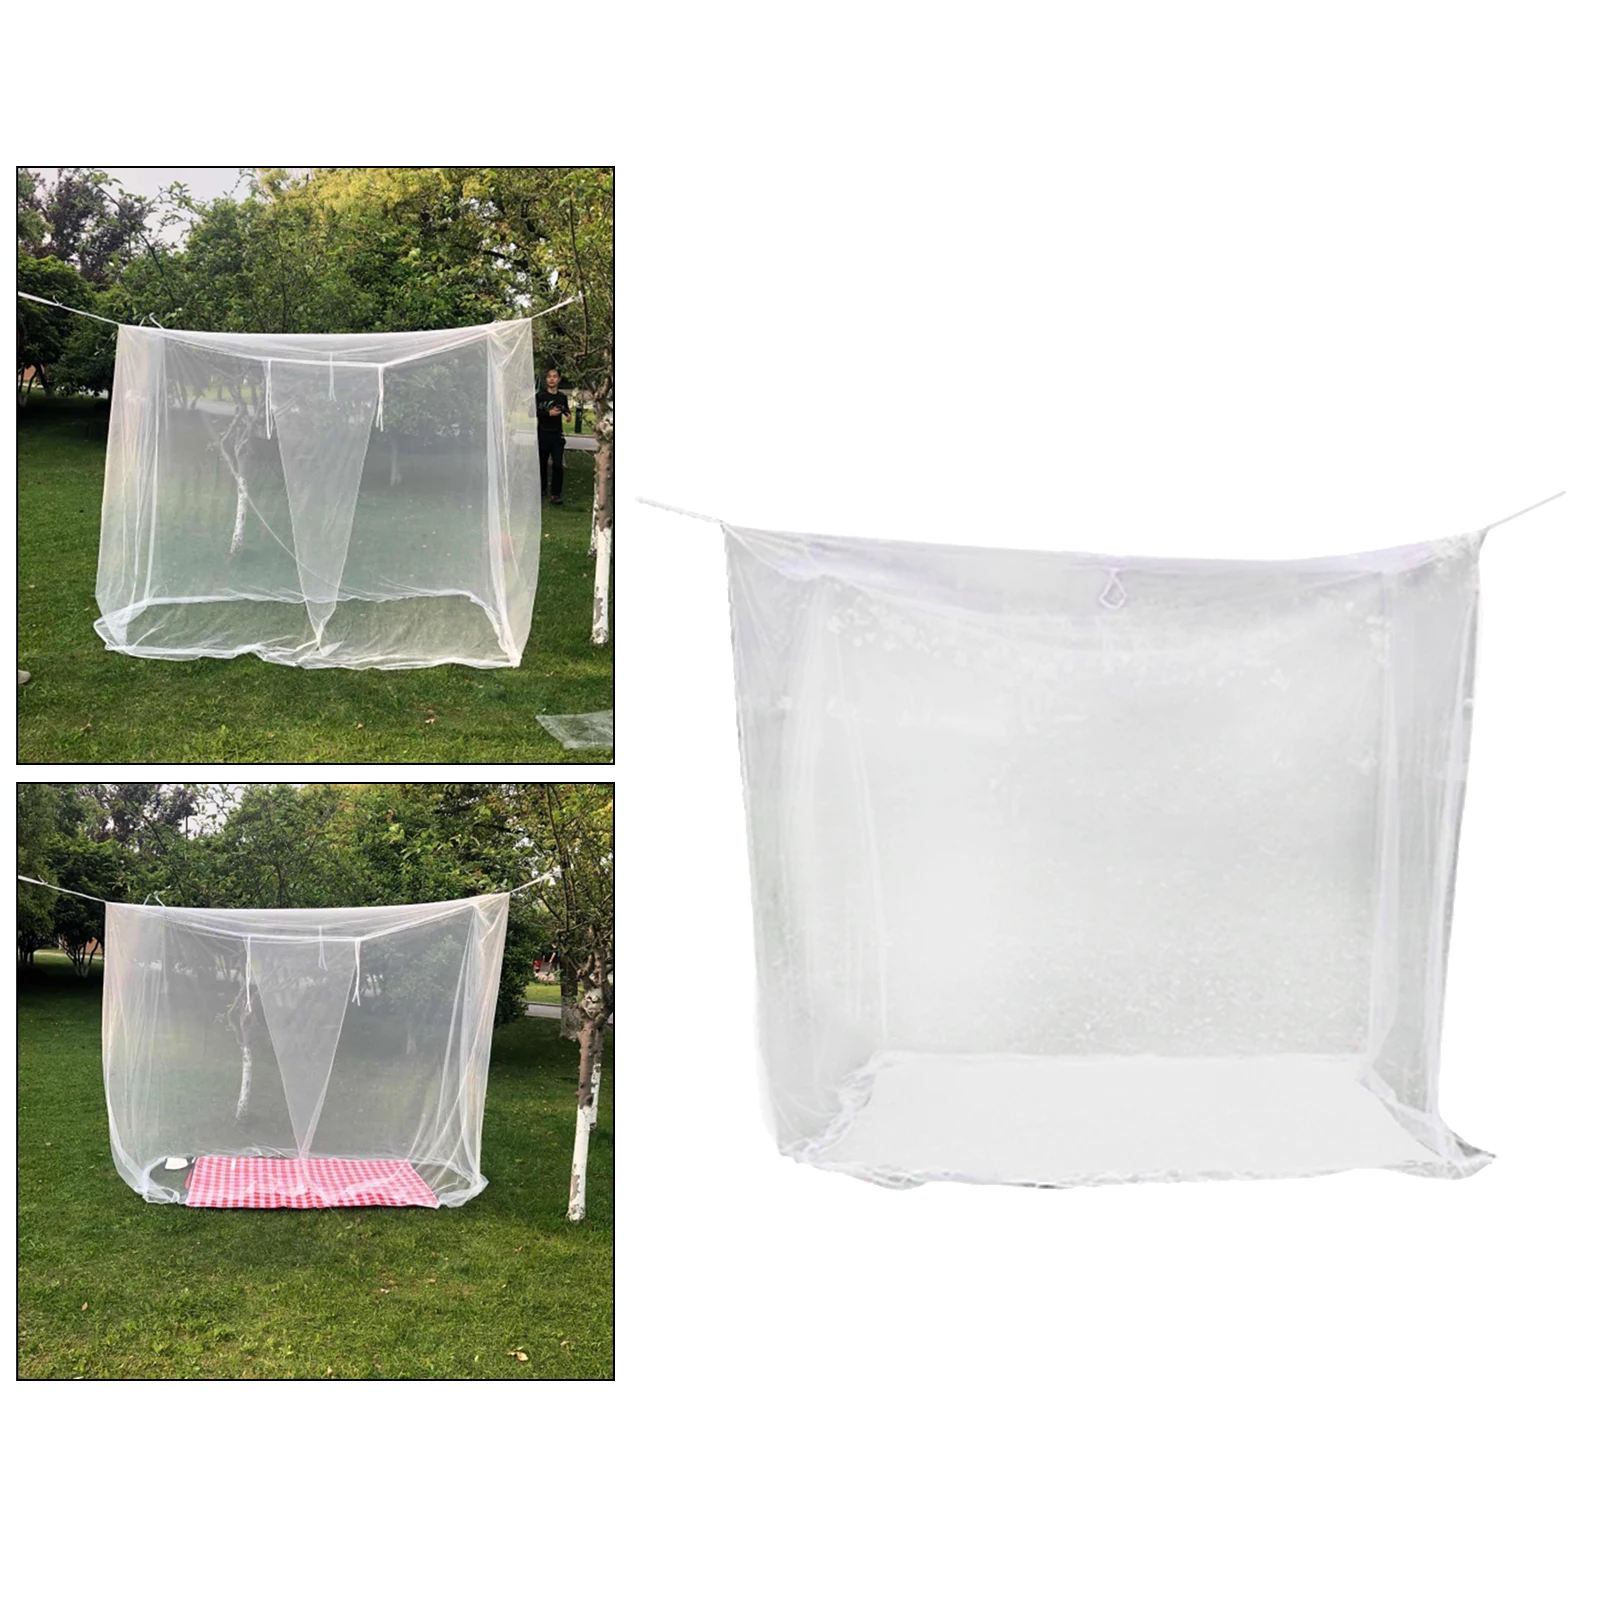 Net Outdoors Camping  Netting Tent Cover Canopy 200x200x180cm